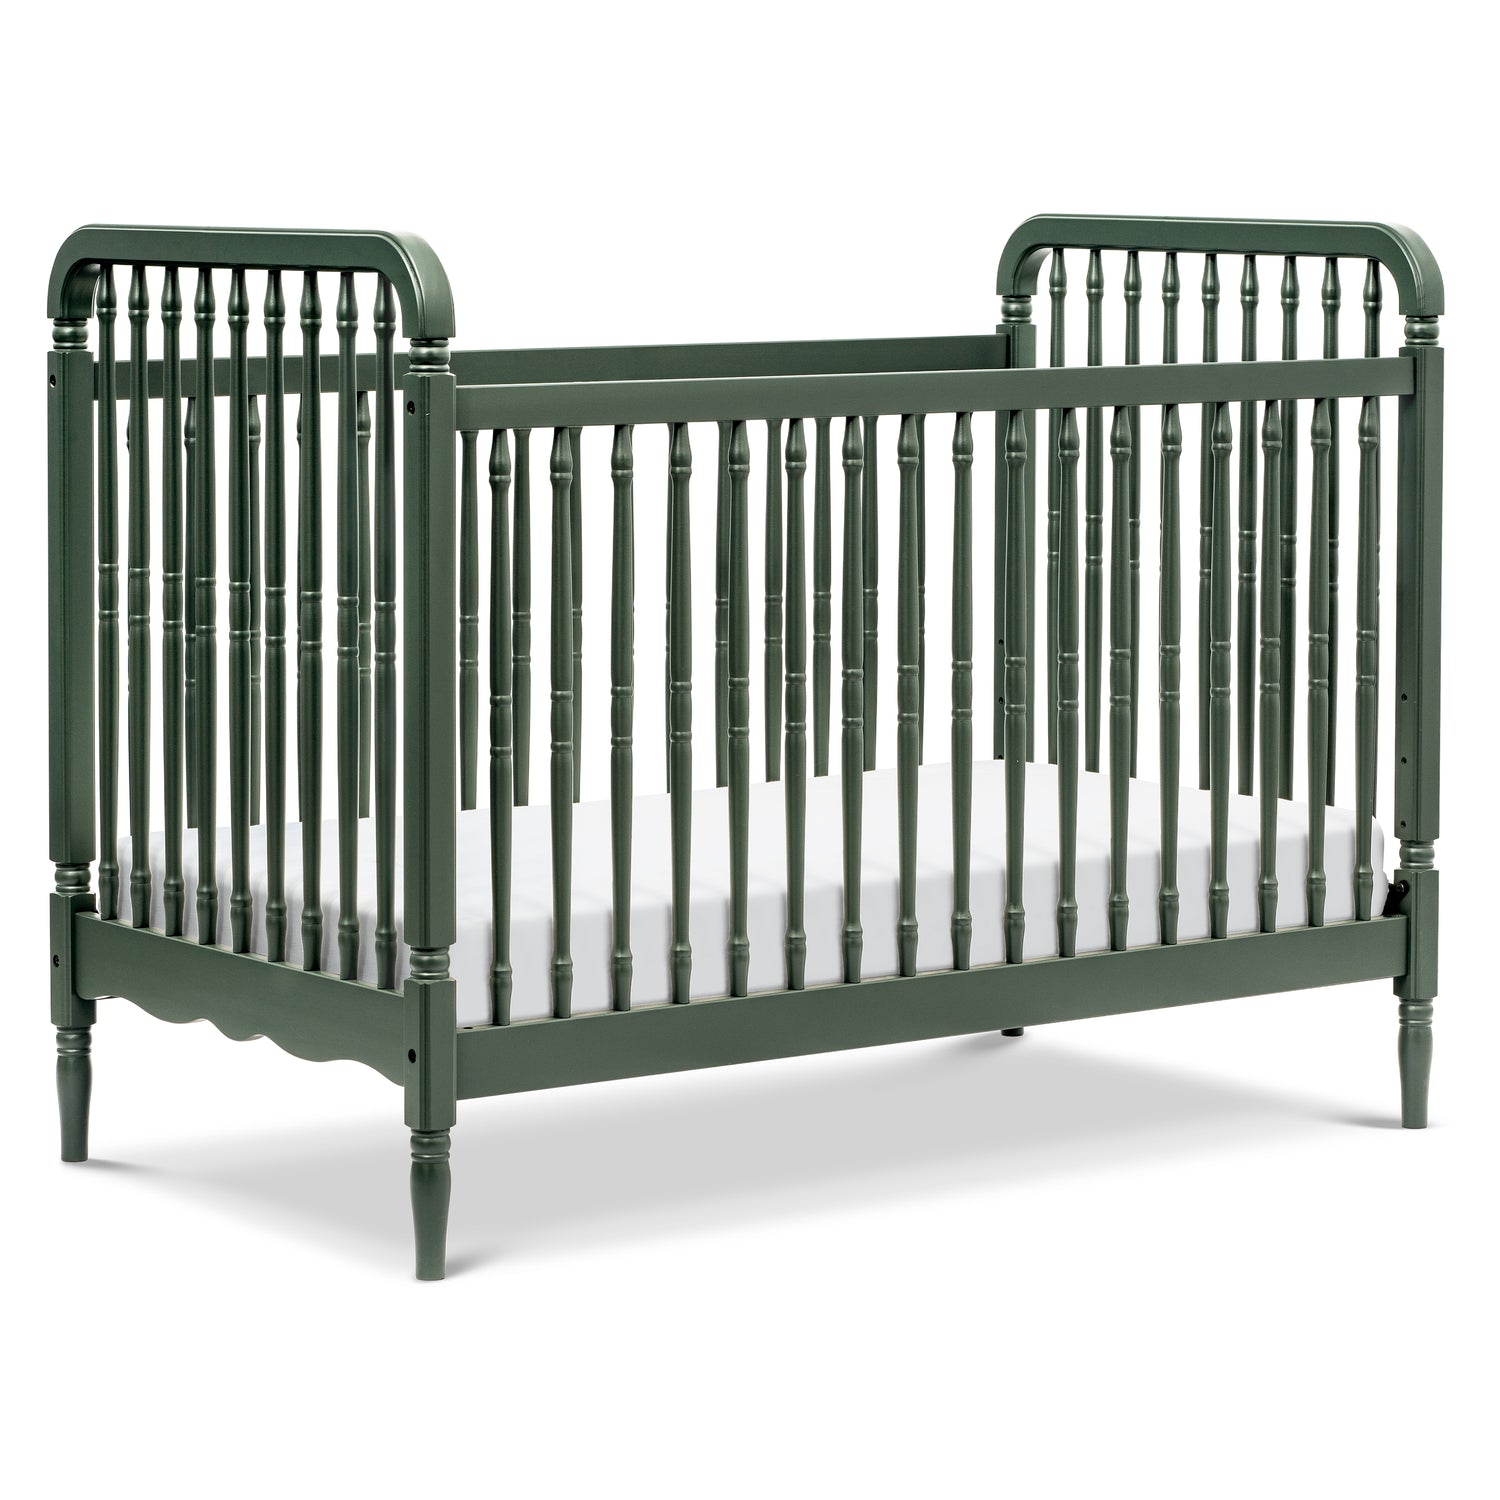 M7101FRGR,Liberty 3-in-1 Convertible Spindle Crib With Toddler Bed Conversion Kit in Forest Green